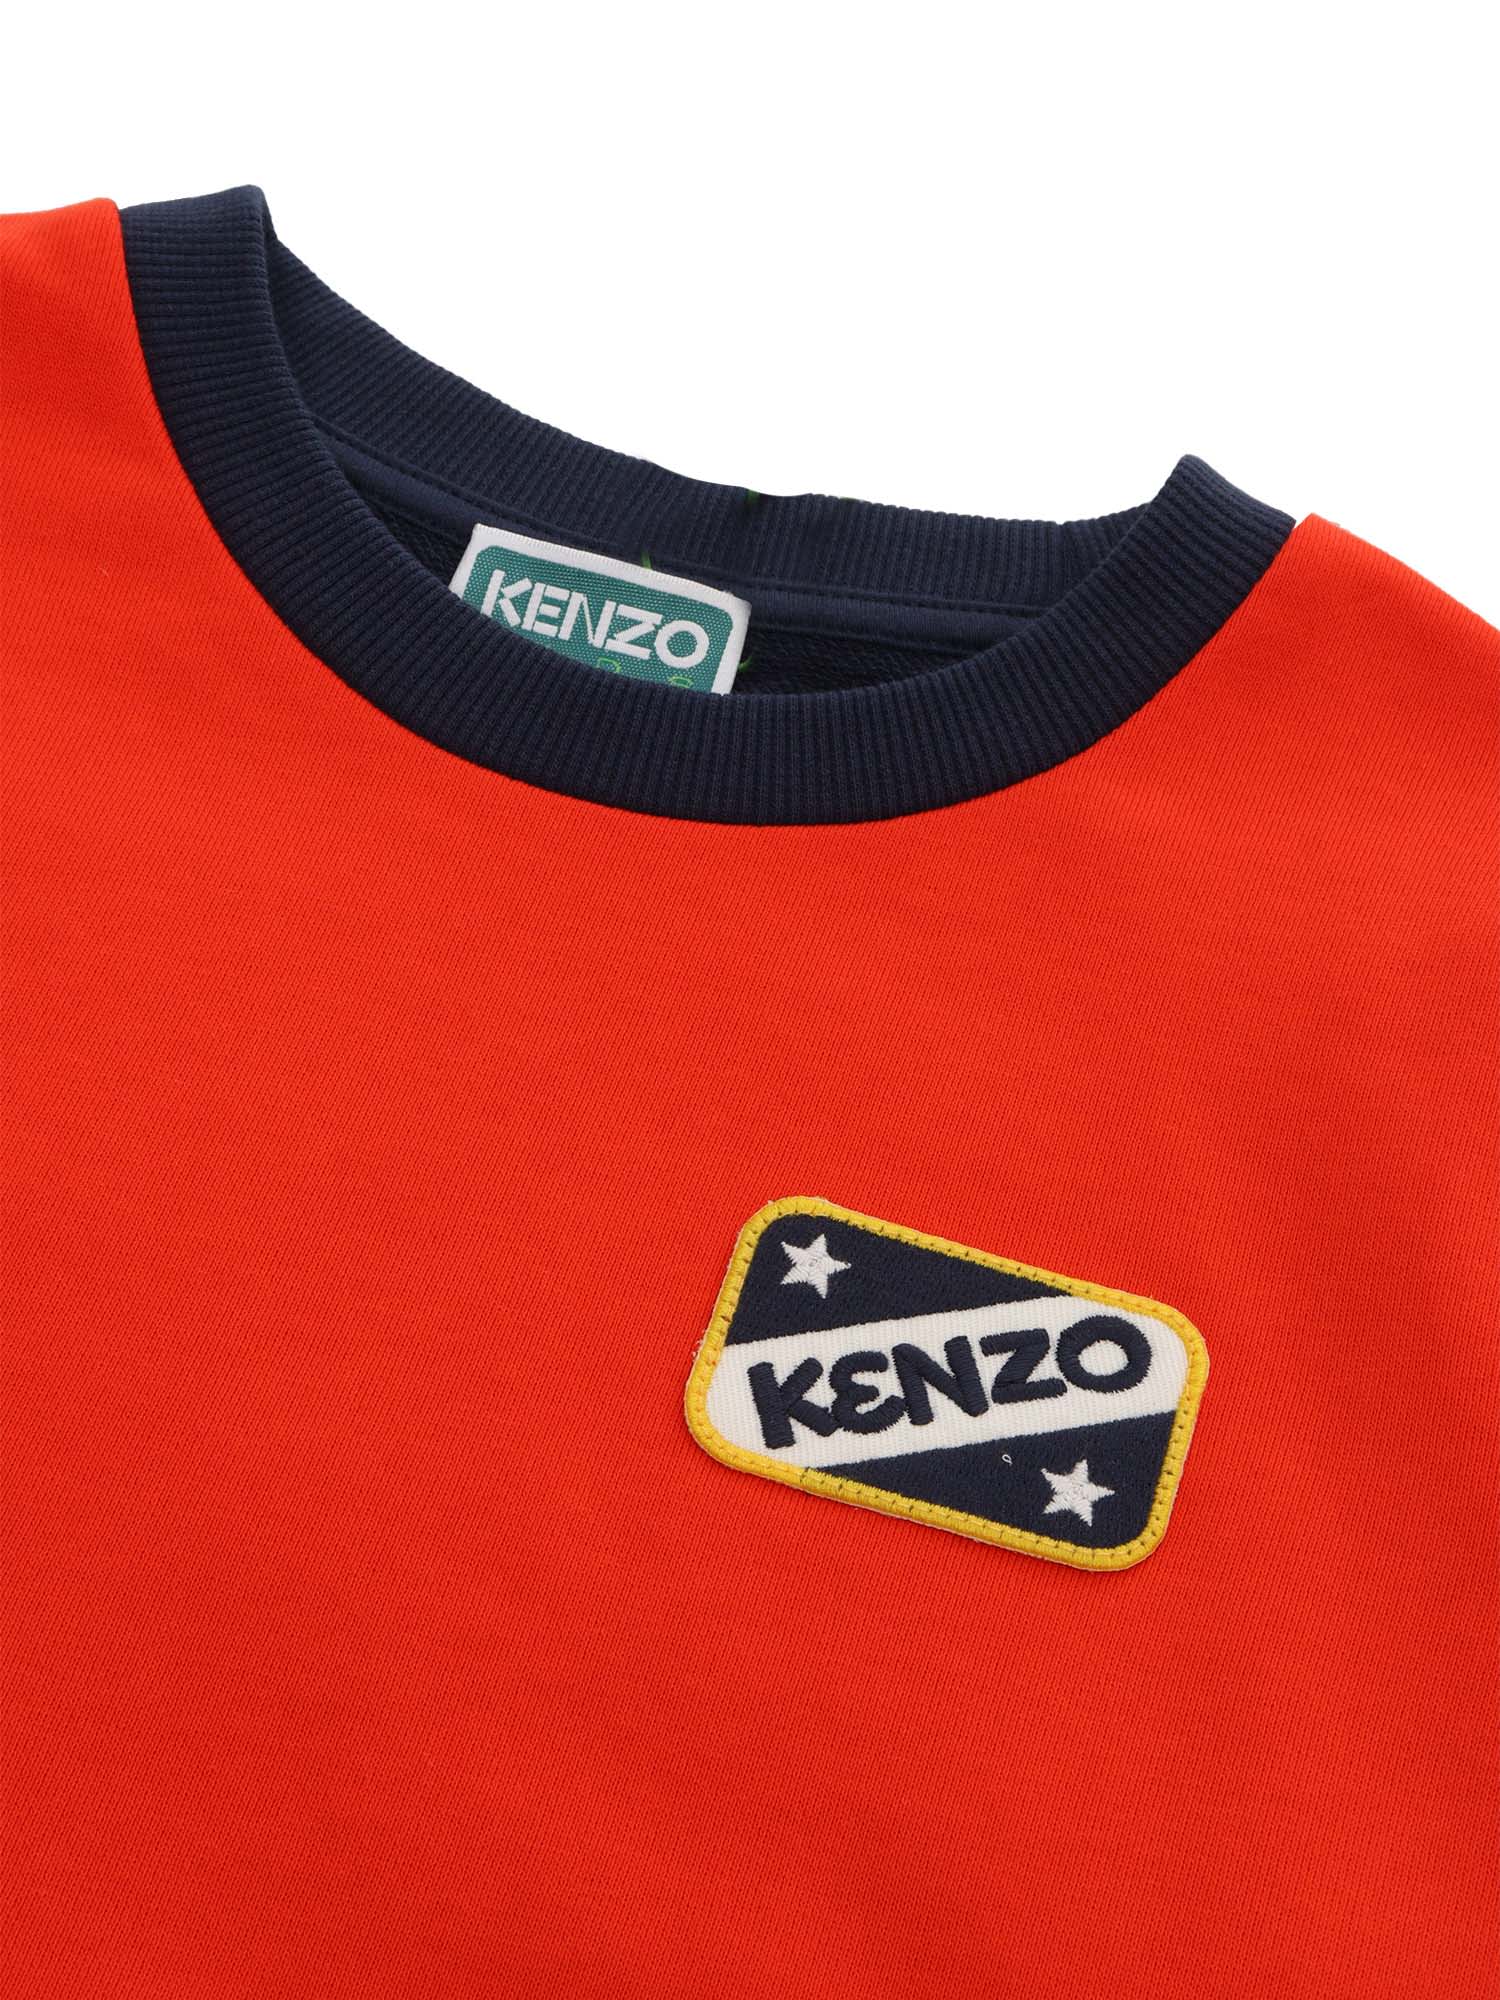 Shop Kenzo Red Sweater